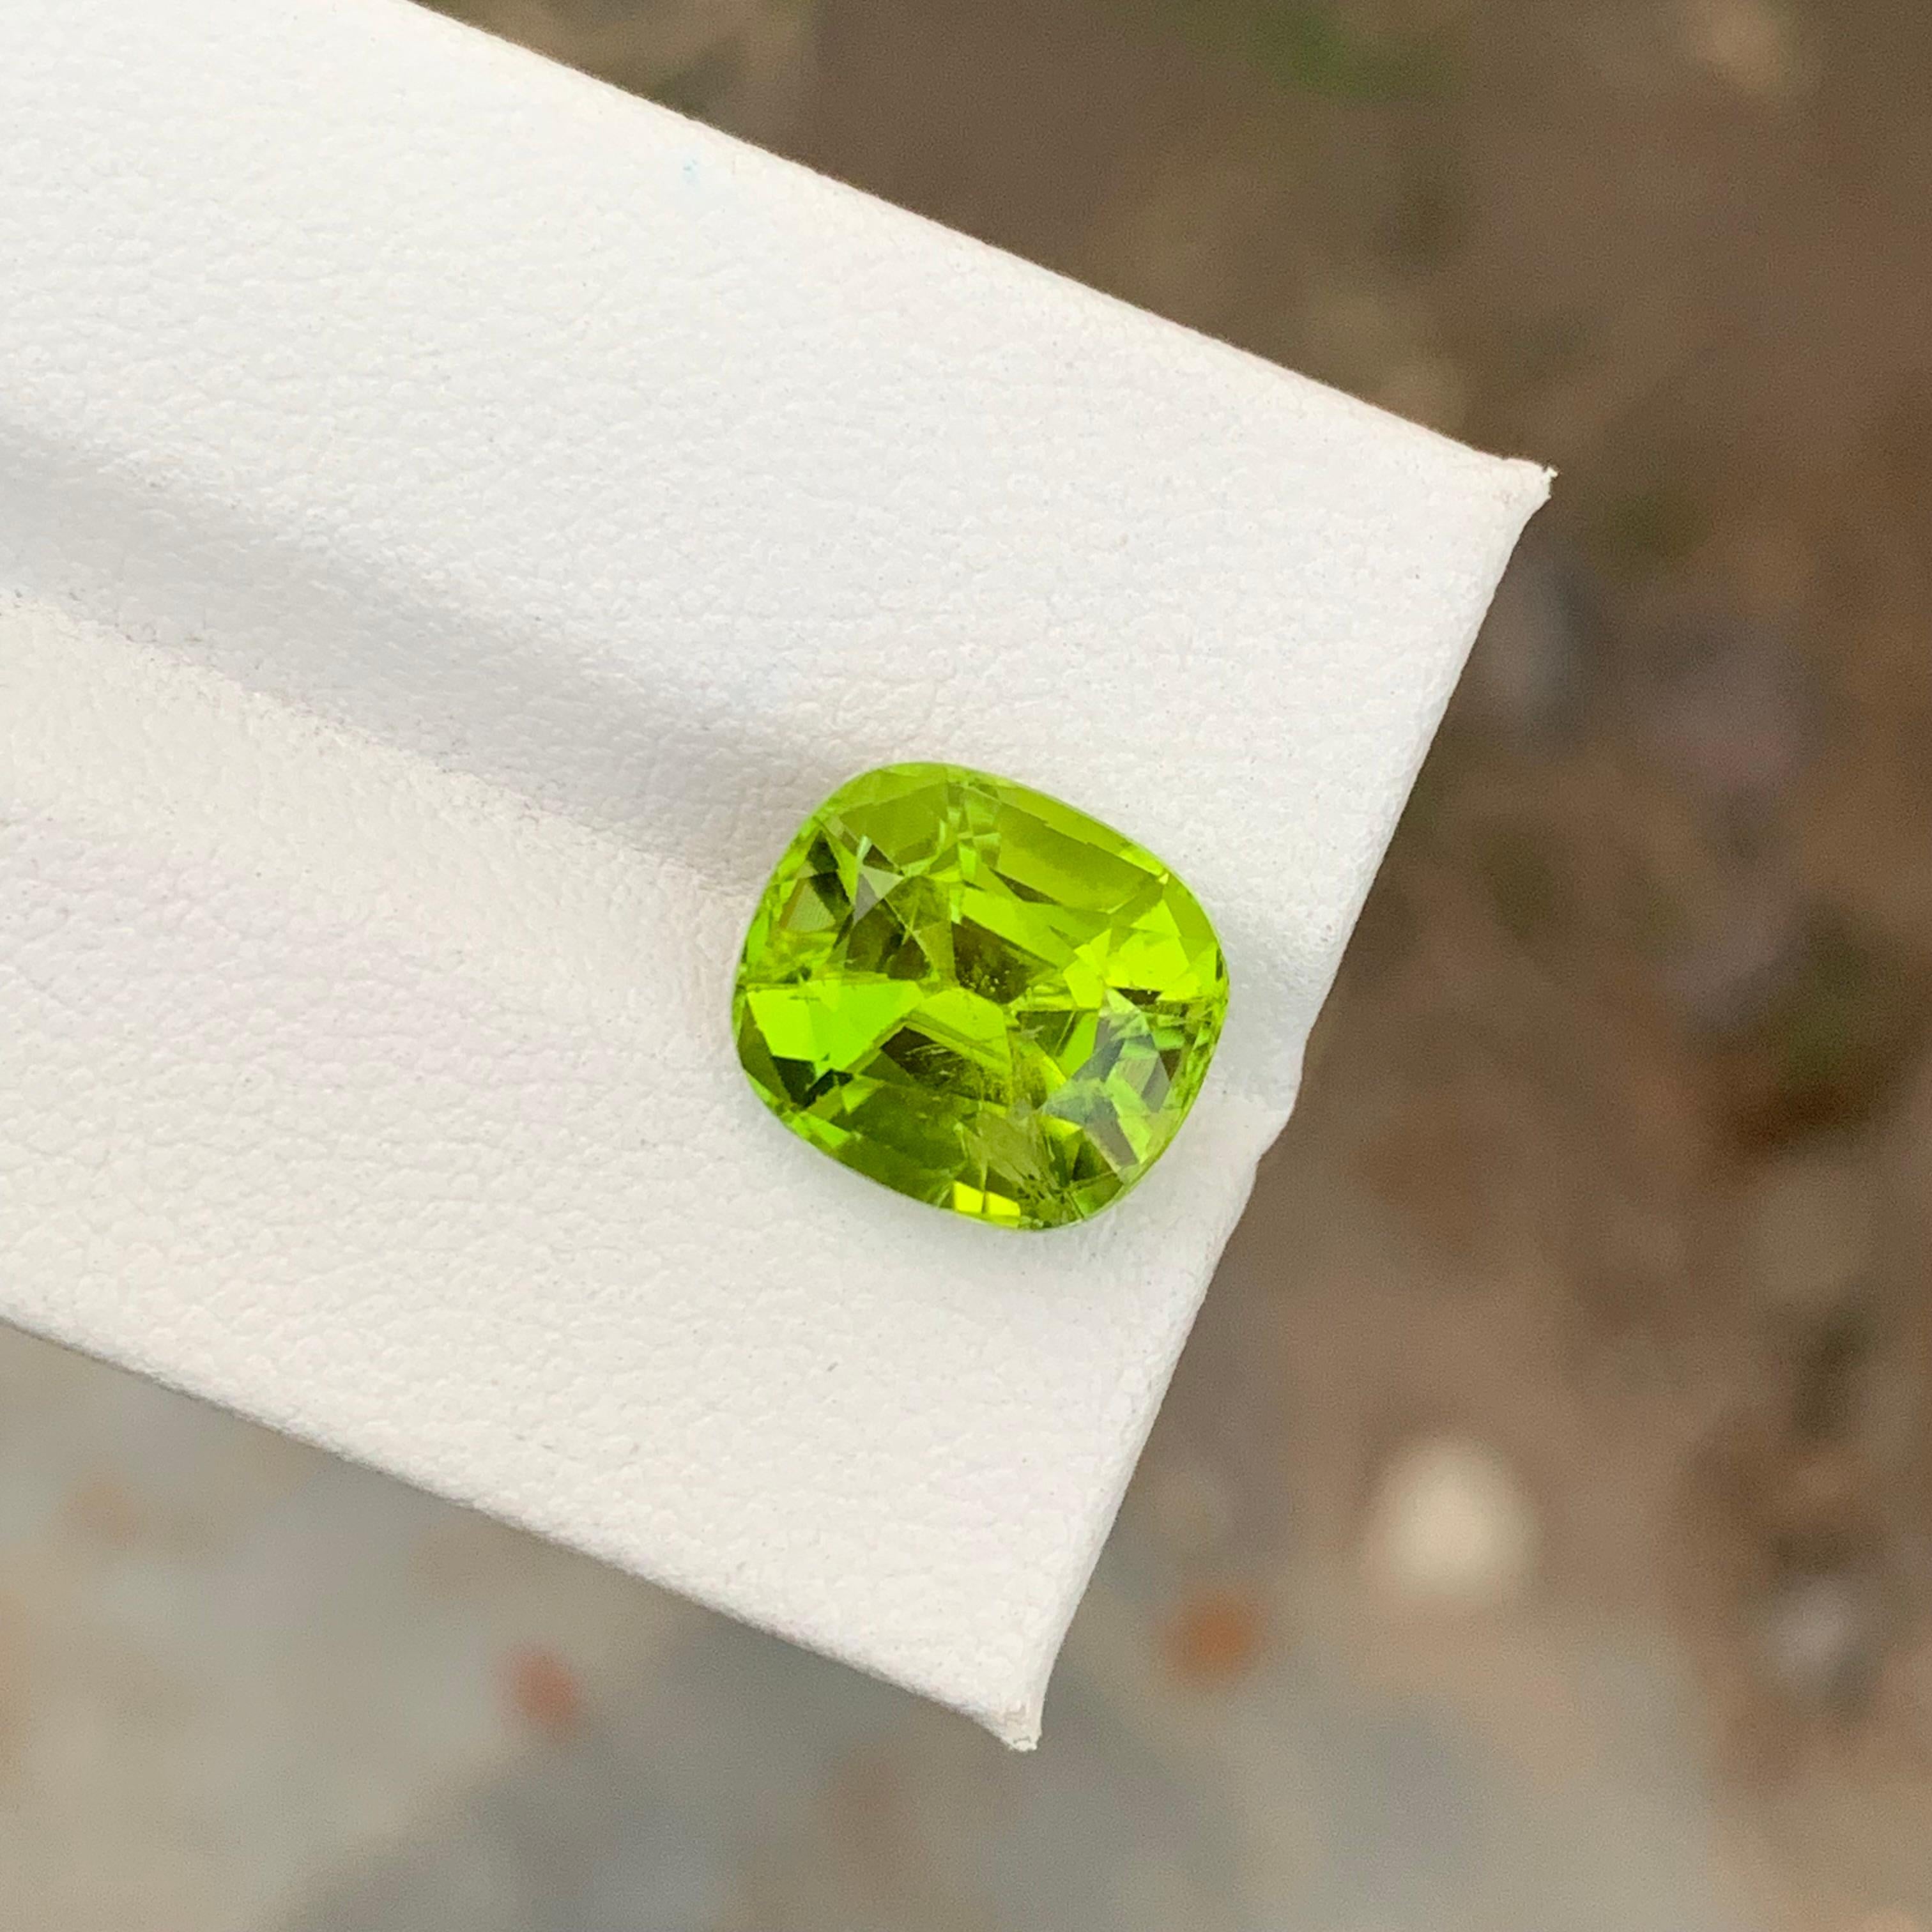 Stunning Natural Faceted Green Peridot Ring Gemstone 6.05 Carats  For Sale 5